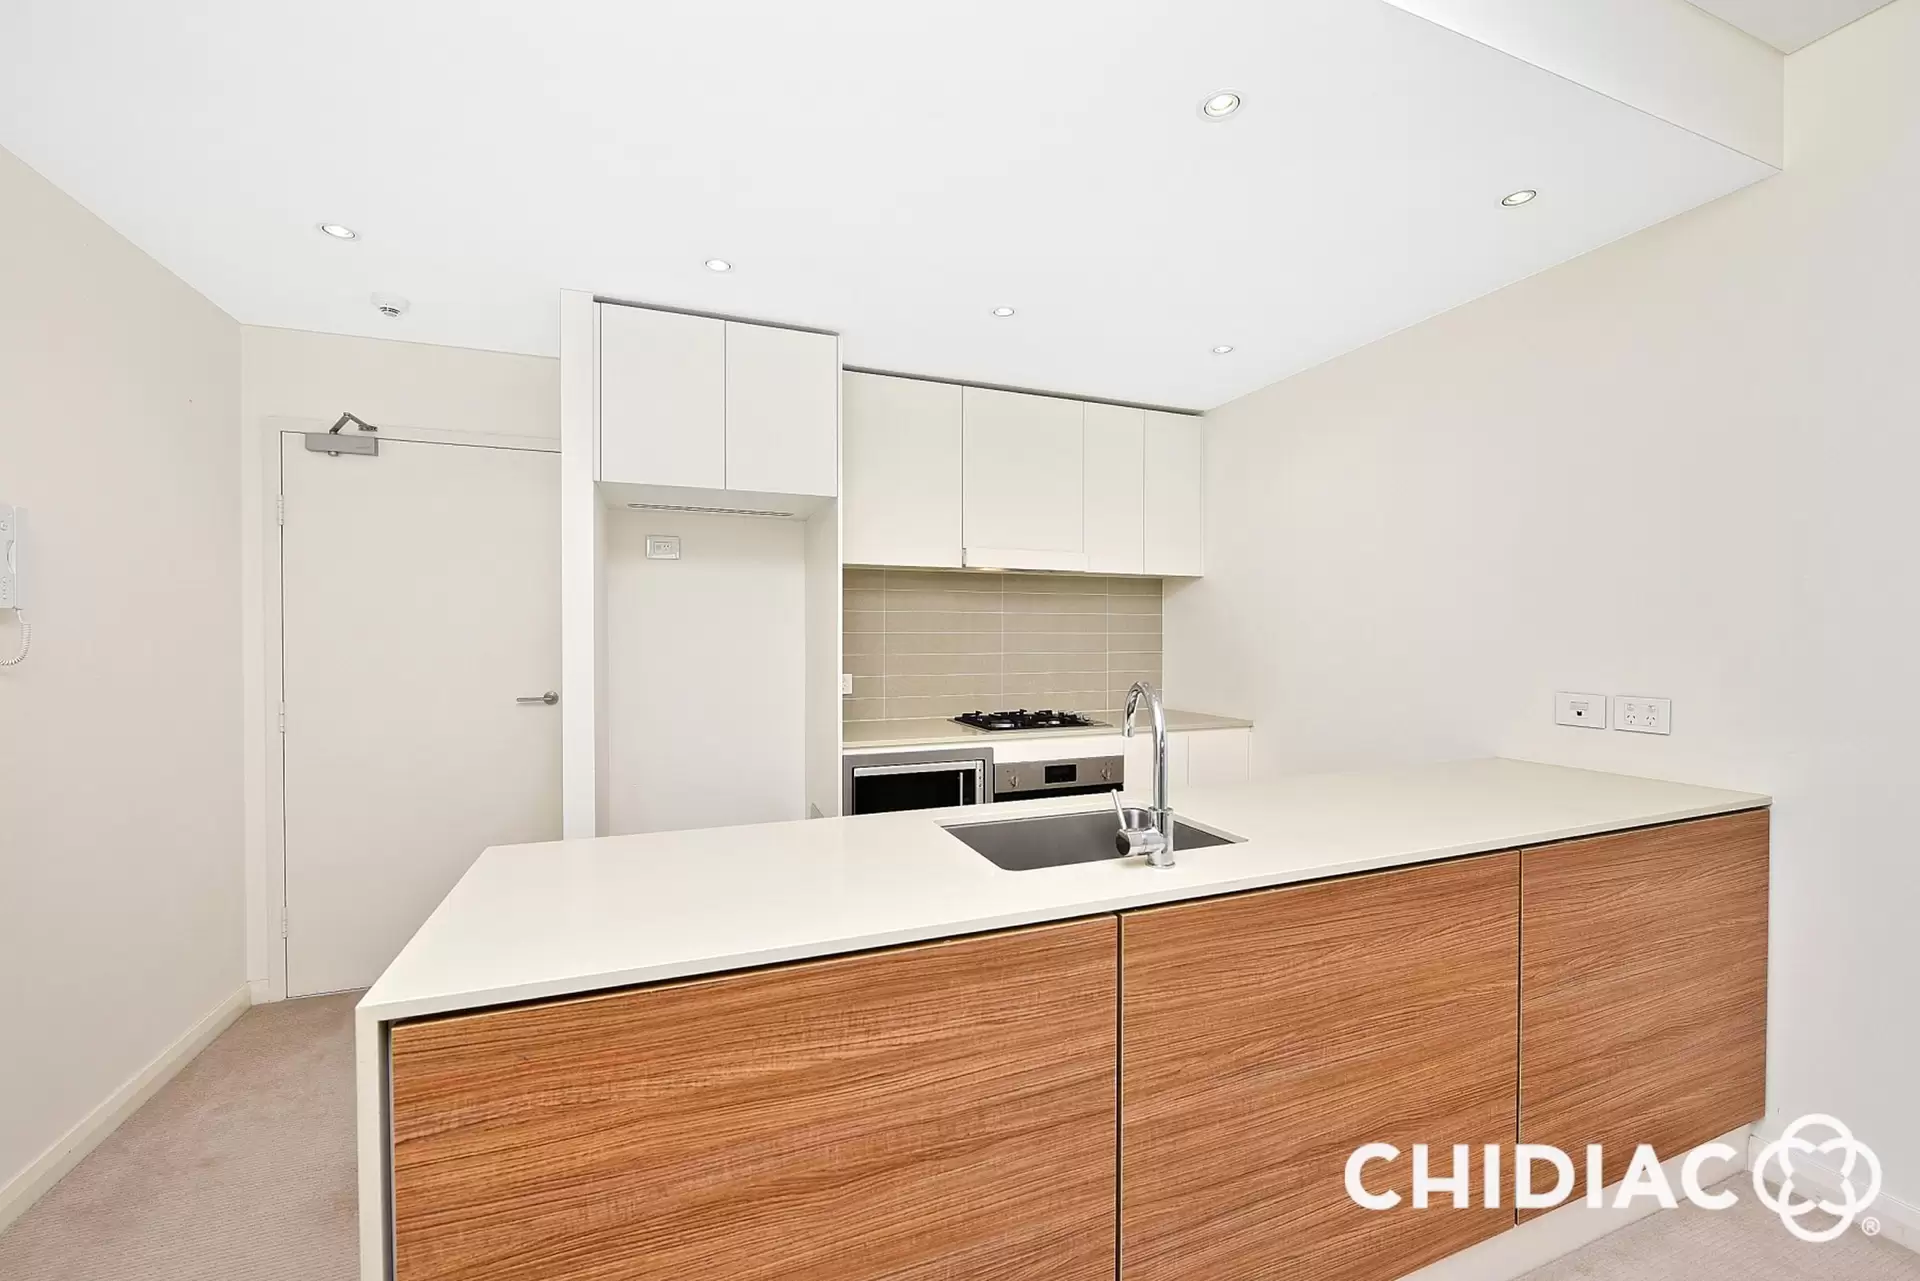 309/18 Corniche Drive, Wentworth Point Leased by Chidiac Realty - image 1